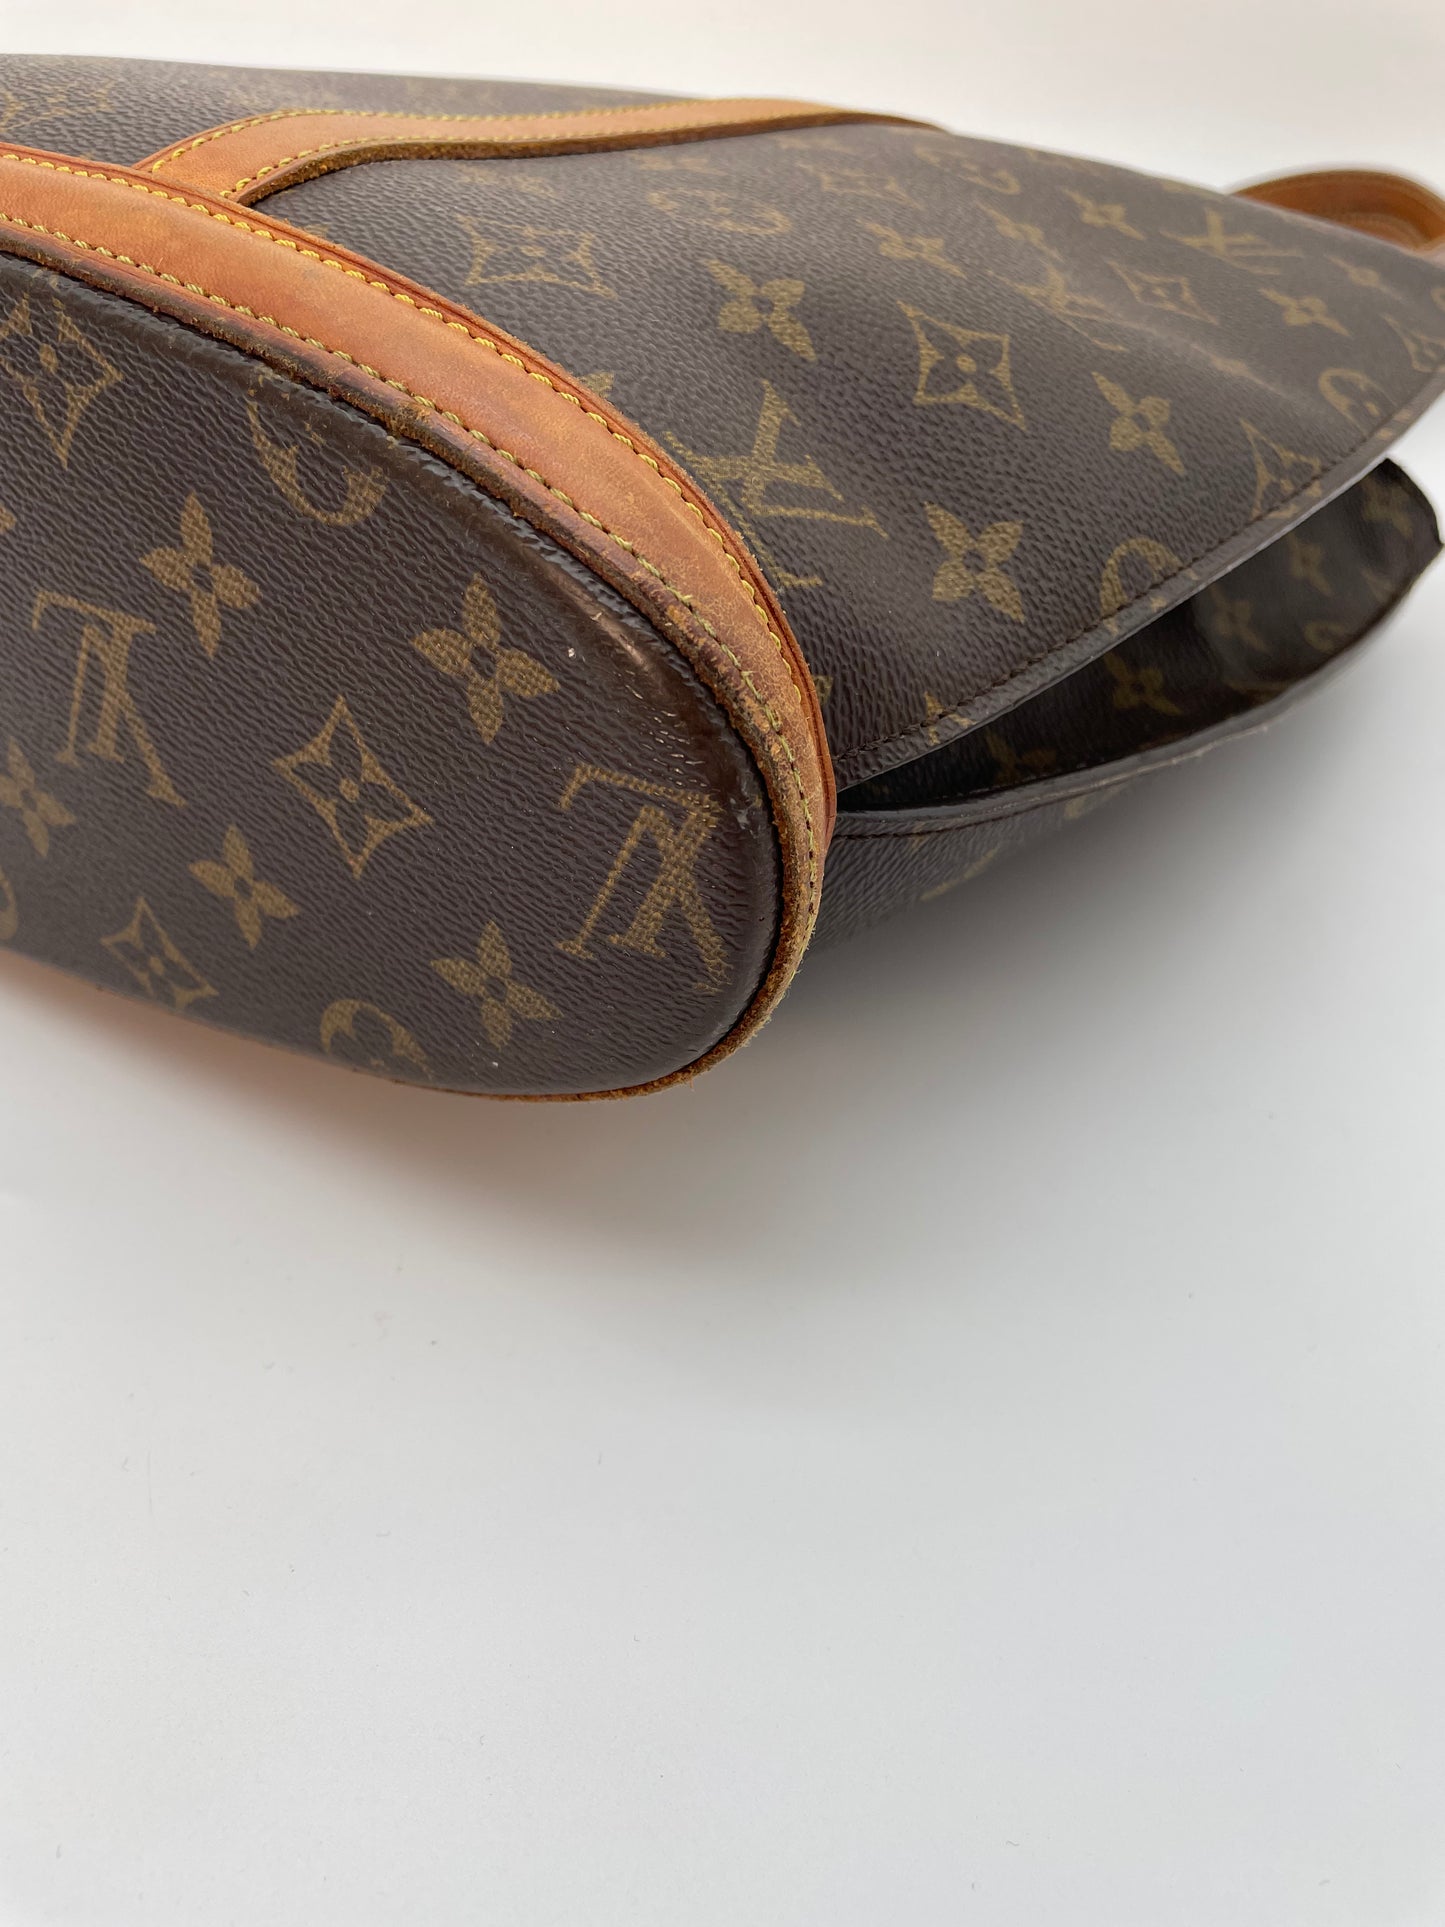 ❤️REVIEW - Louis Vuitton Babylone Tote 